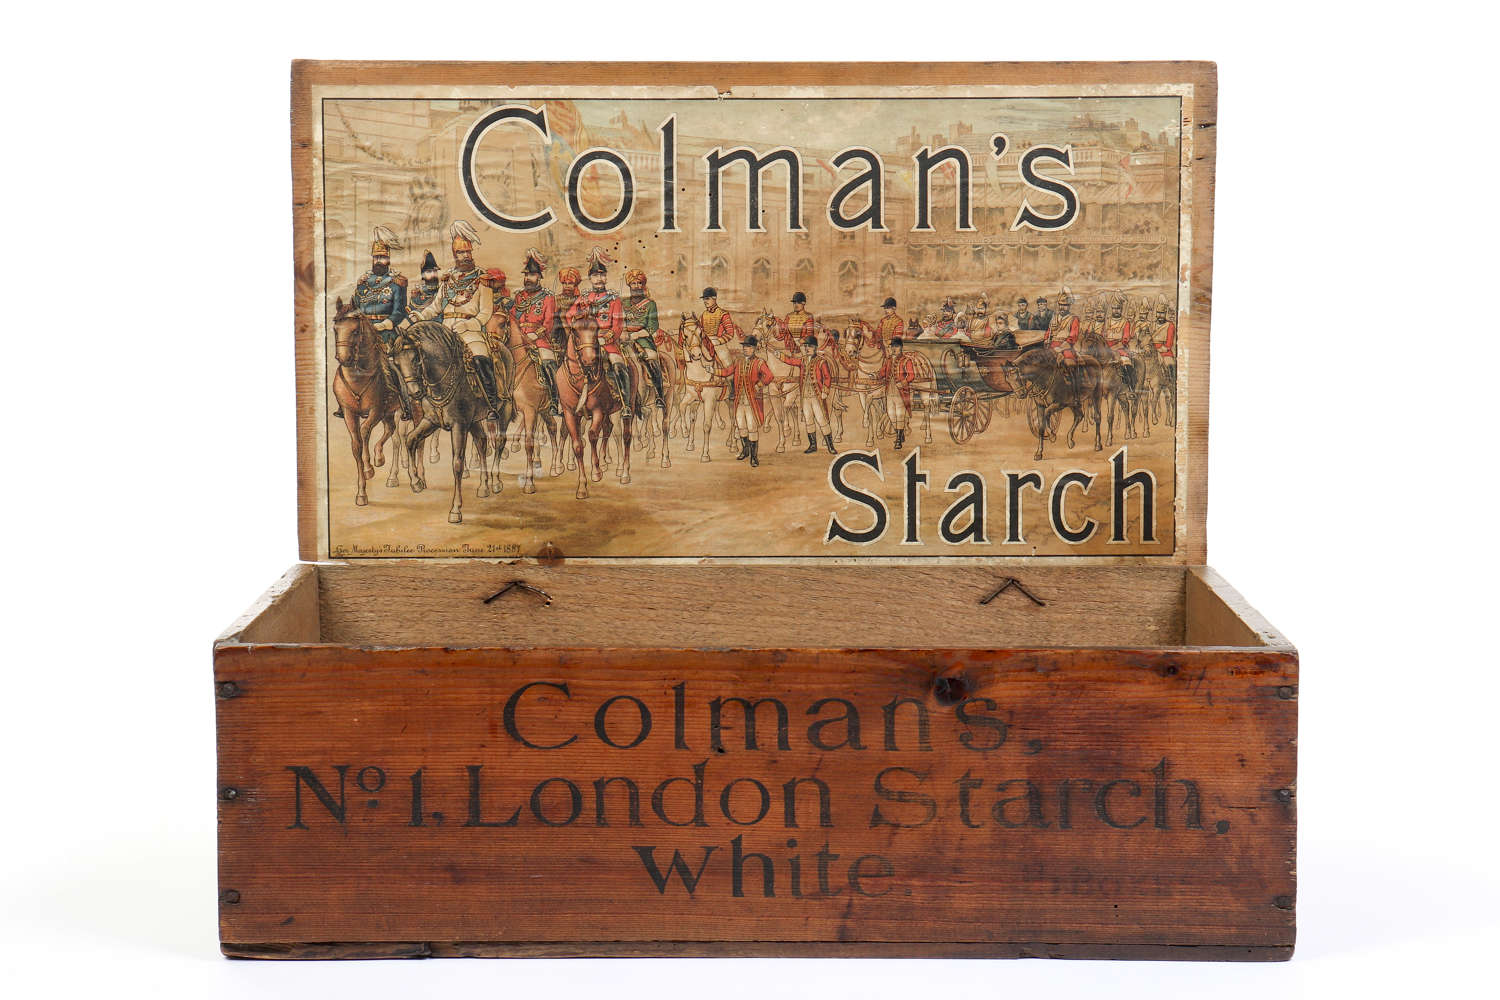 Original shop delivery and display box for Colman's Starch